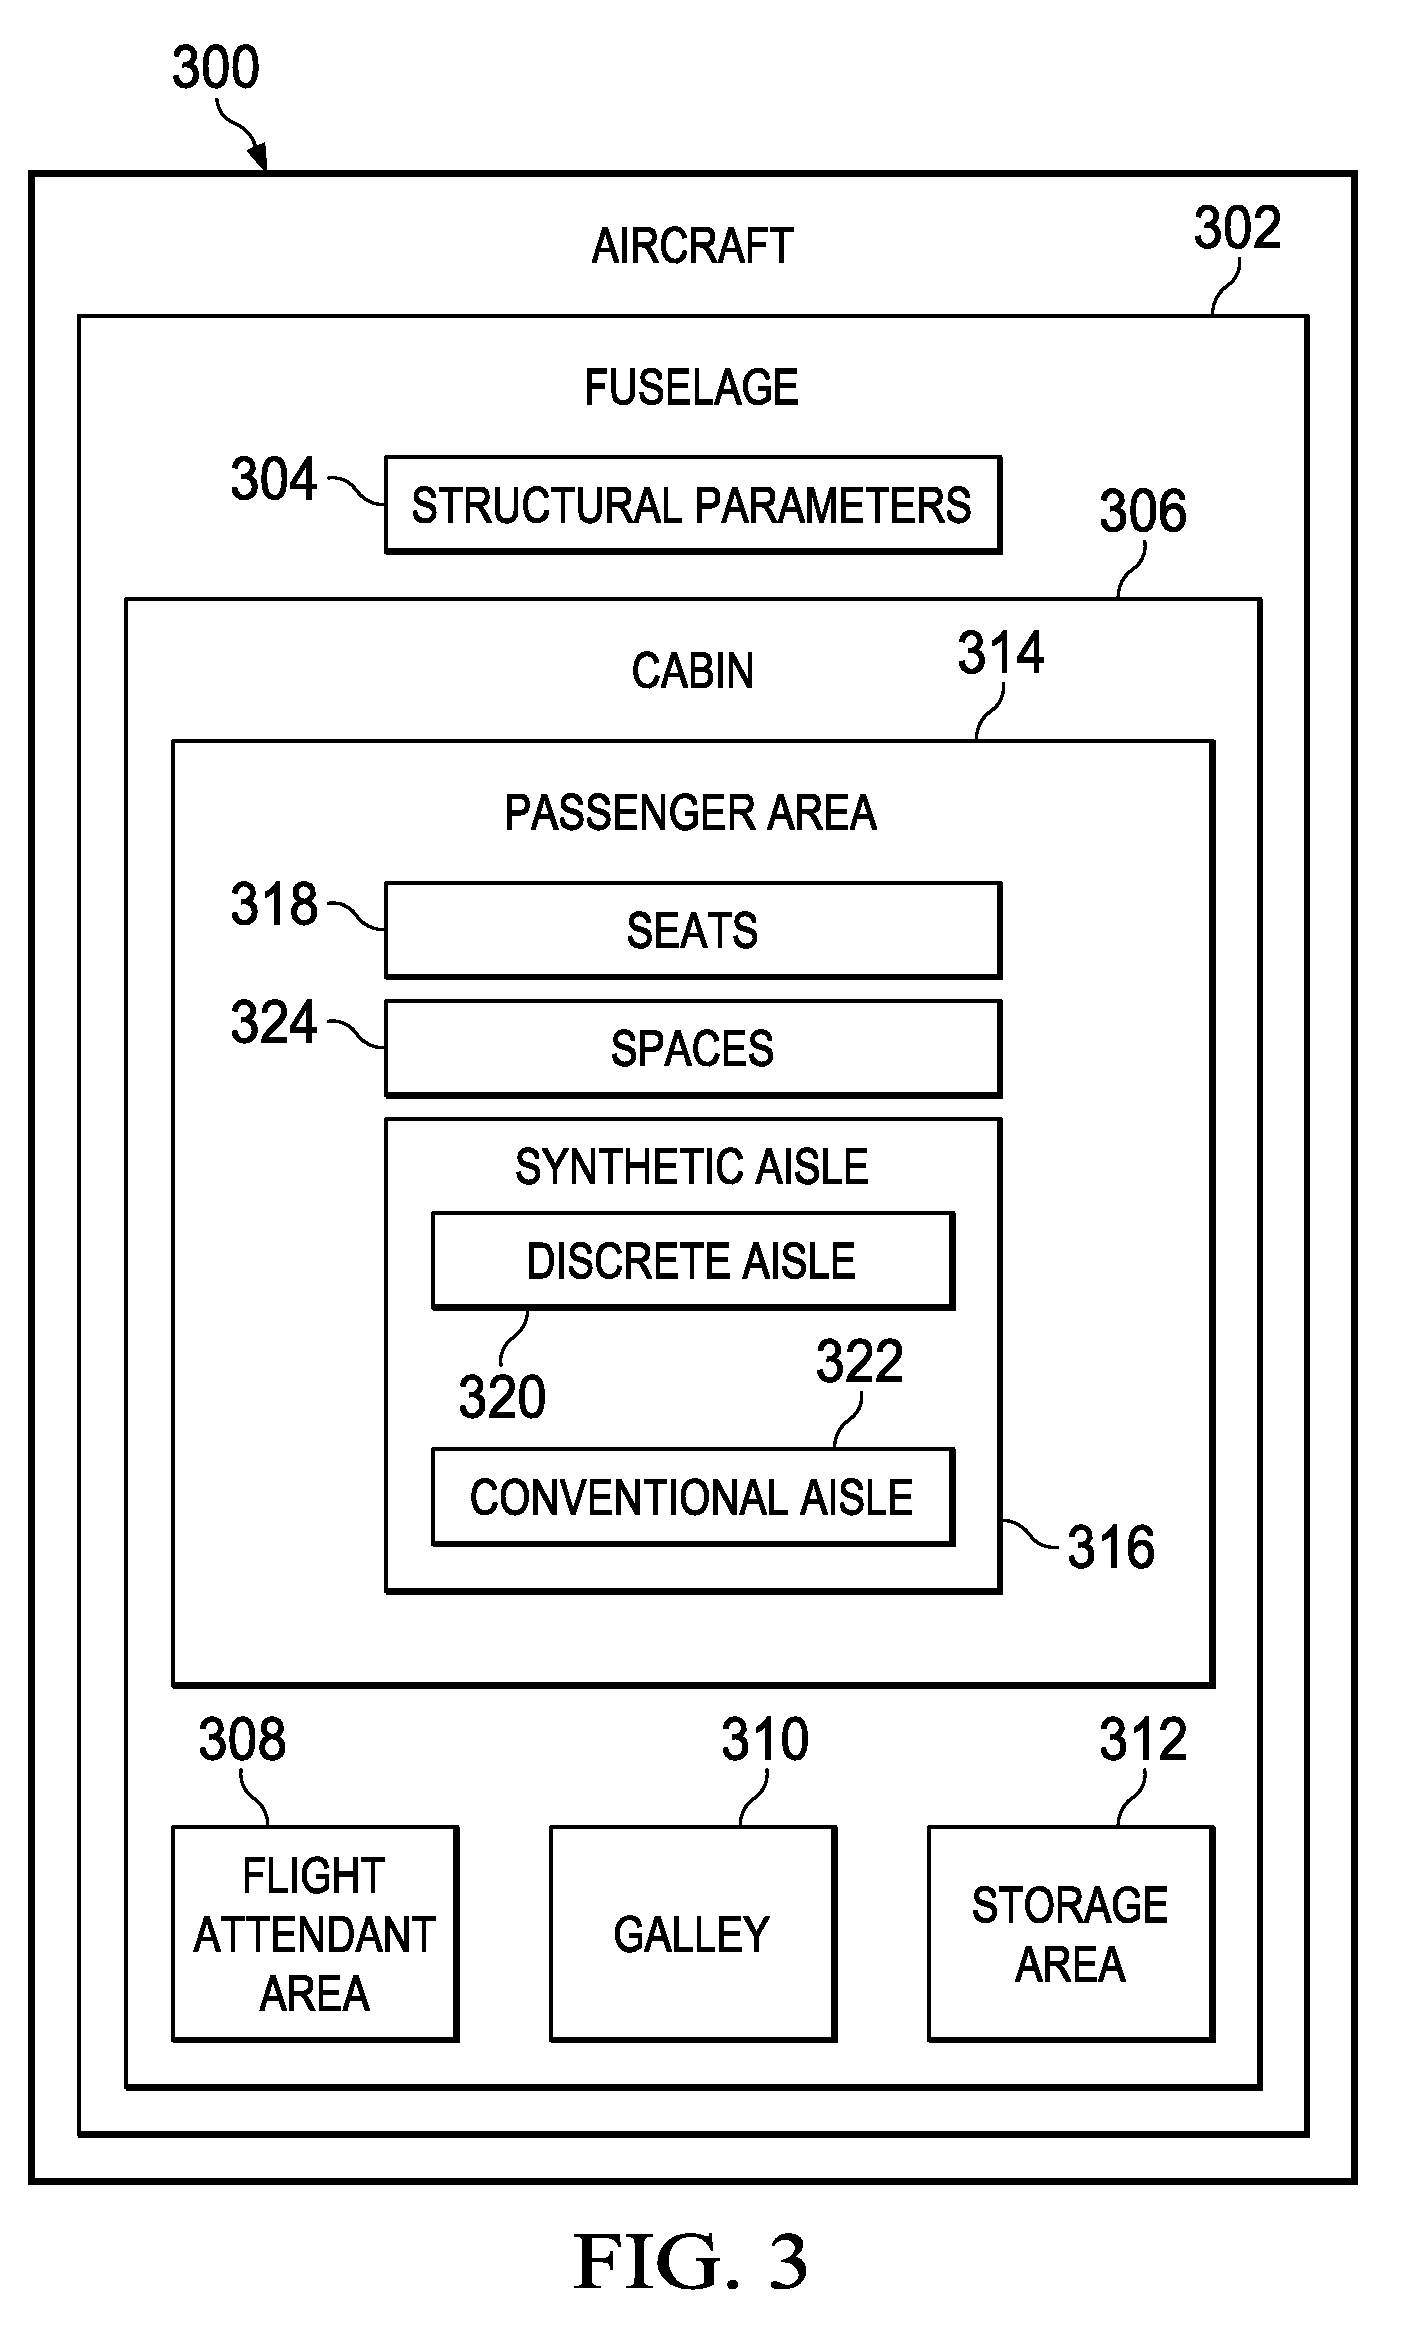 Synthetic aisle configuration for an aircraft